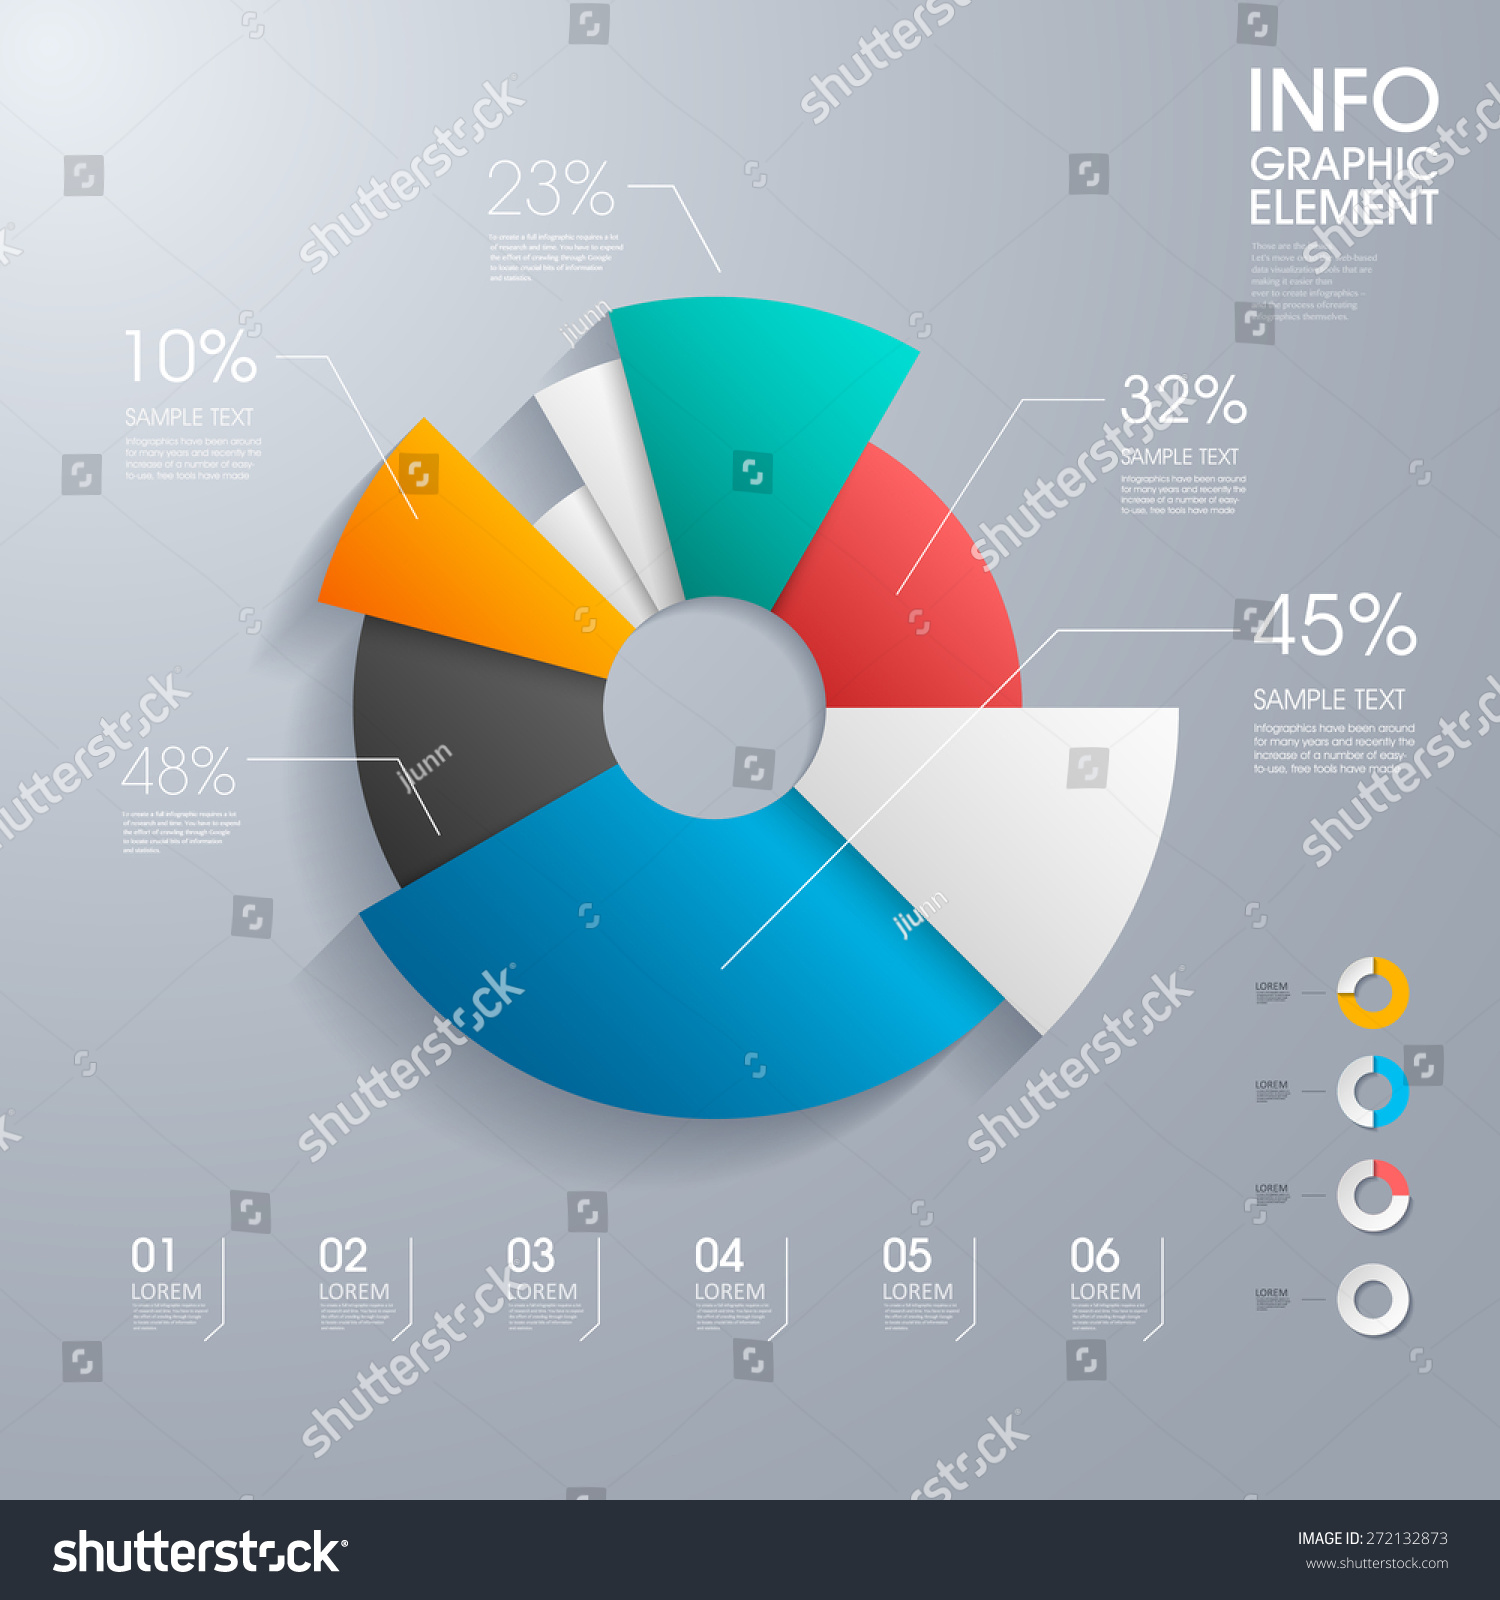 Modern Vector Abstract Pie Chart Infographic Elements.Can Be Used For ...